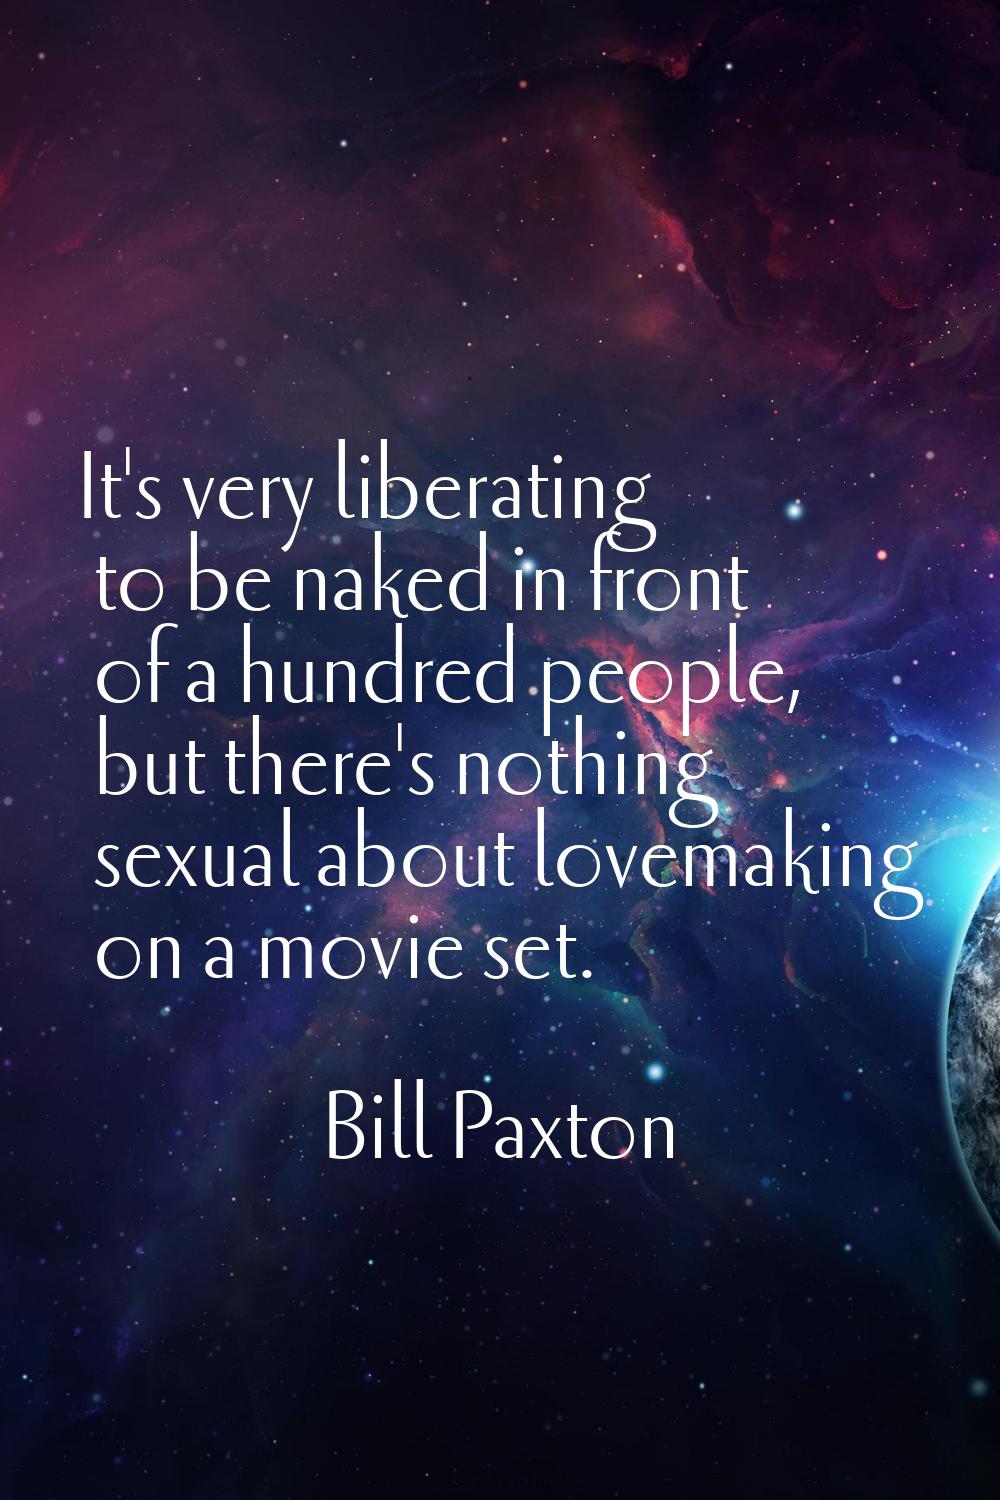 It's very liberating to be naked in front of a hundred people, but there's nothing sexual about lov